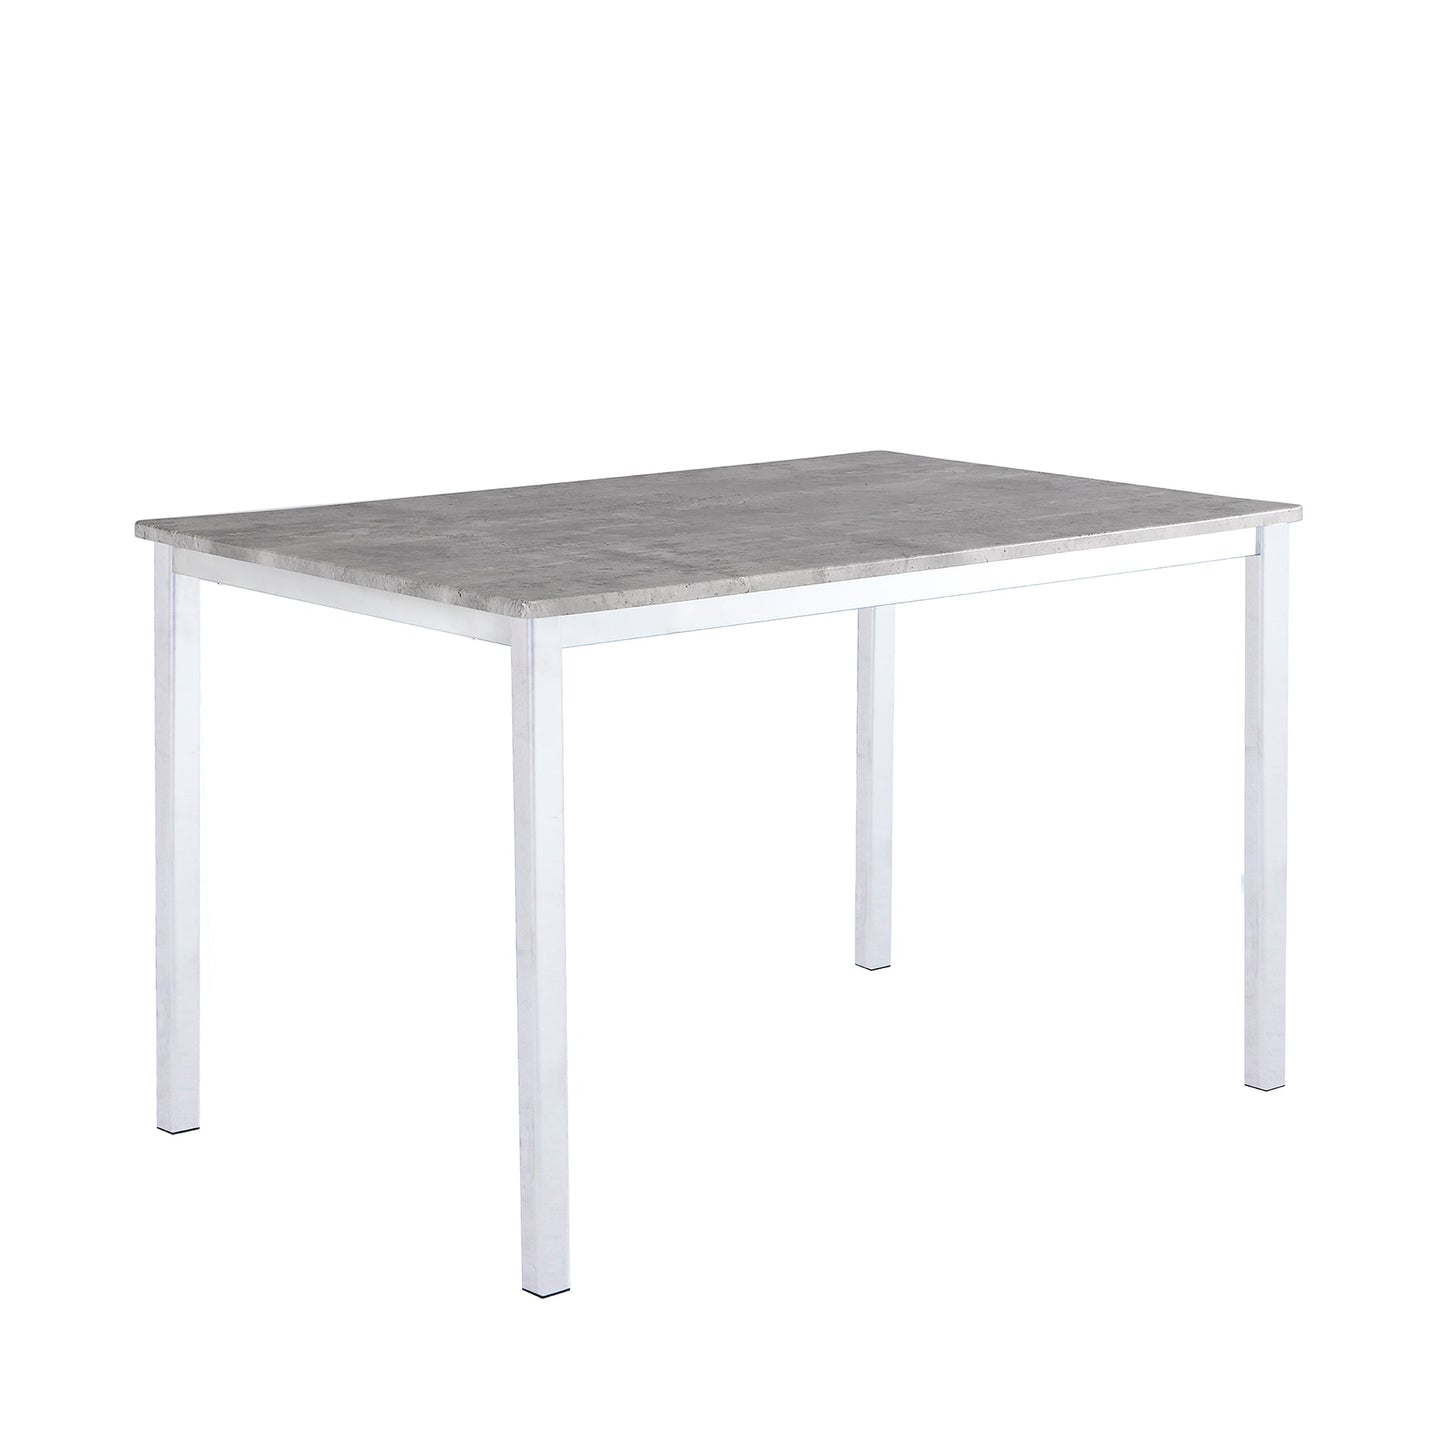 Milo 4 Seater Concrete Top dining table with Chrome legs